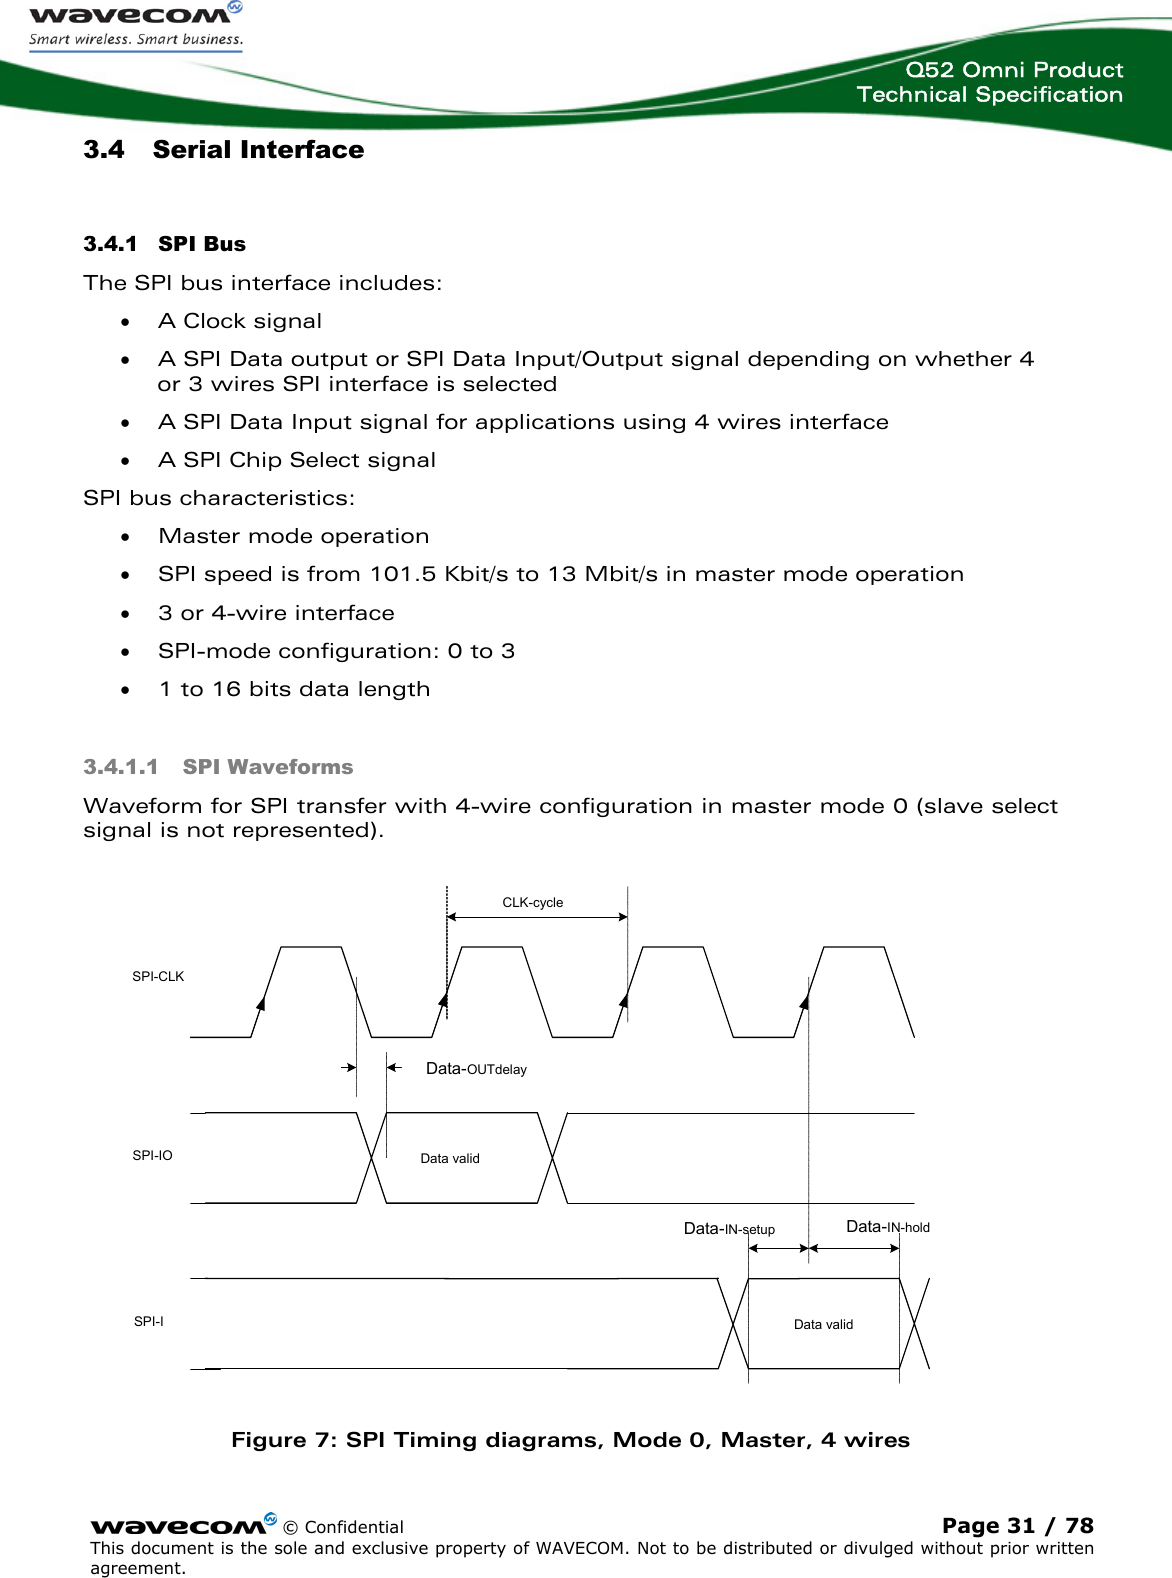  Q52 Omni Product Technical Specification    © Confidential Page 31 / 78 This document is the sole and exclusive property of WAVECOM. Not to be distributed or divulged without prior written agreement.  3.4 Serial Interface 3.4.1 SPI Bus  The SPI bus interface includes: • A Clock signal • A SPI Data output or SPI Data Input/Output signal depending on whether 4 or 3 wires SPI interface is selected • A SPI Data Input signal for applications using 4 wires interface • A SPI Chip Select signal  SPI bus characteristics: • Master mode operation • SPI speed is from 101.5 Kbit/s to 13 Mbit/s in master mode operation • 3 or 4-wire interface • SPI-mode configuration: 0 to 3 • 1 to 16 bits data length 3.4.1.1 SPI Waveforms Waveform for SPI transfer with 4-wire configuration in master mode 0 (slave select signal is not represented). Data-OUTdelayCLK-cycleData-IN-holdData-IN-setupData validData validSPI-CLKSPI-IOSPI-I Figure 7: SPI Timing diagrams, Mode 0, Master, 4 wires 